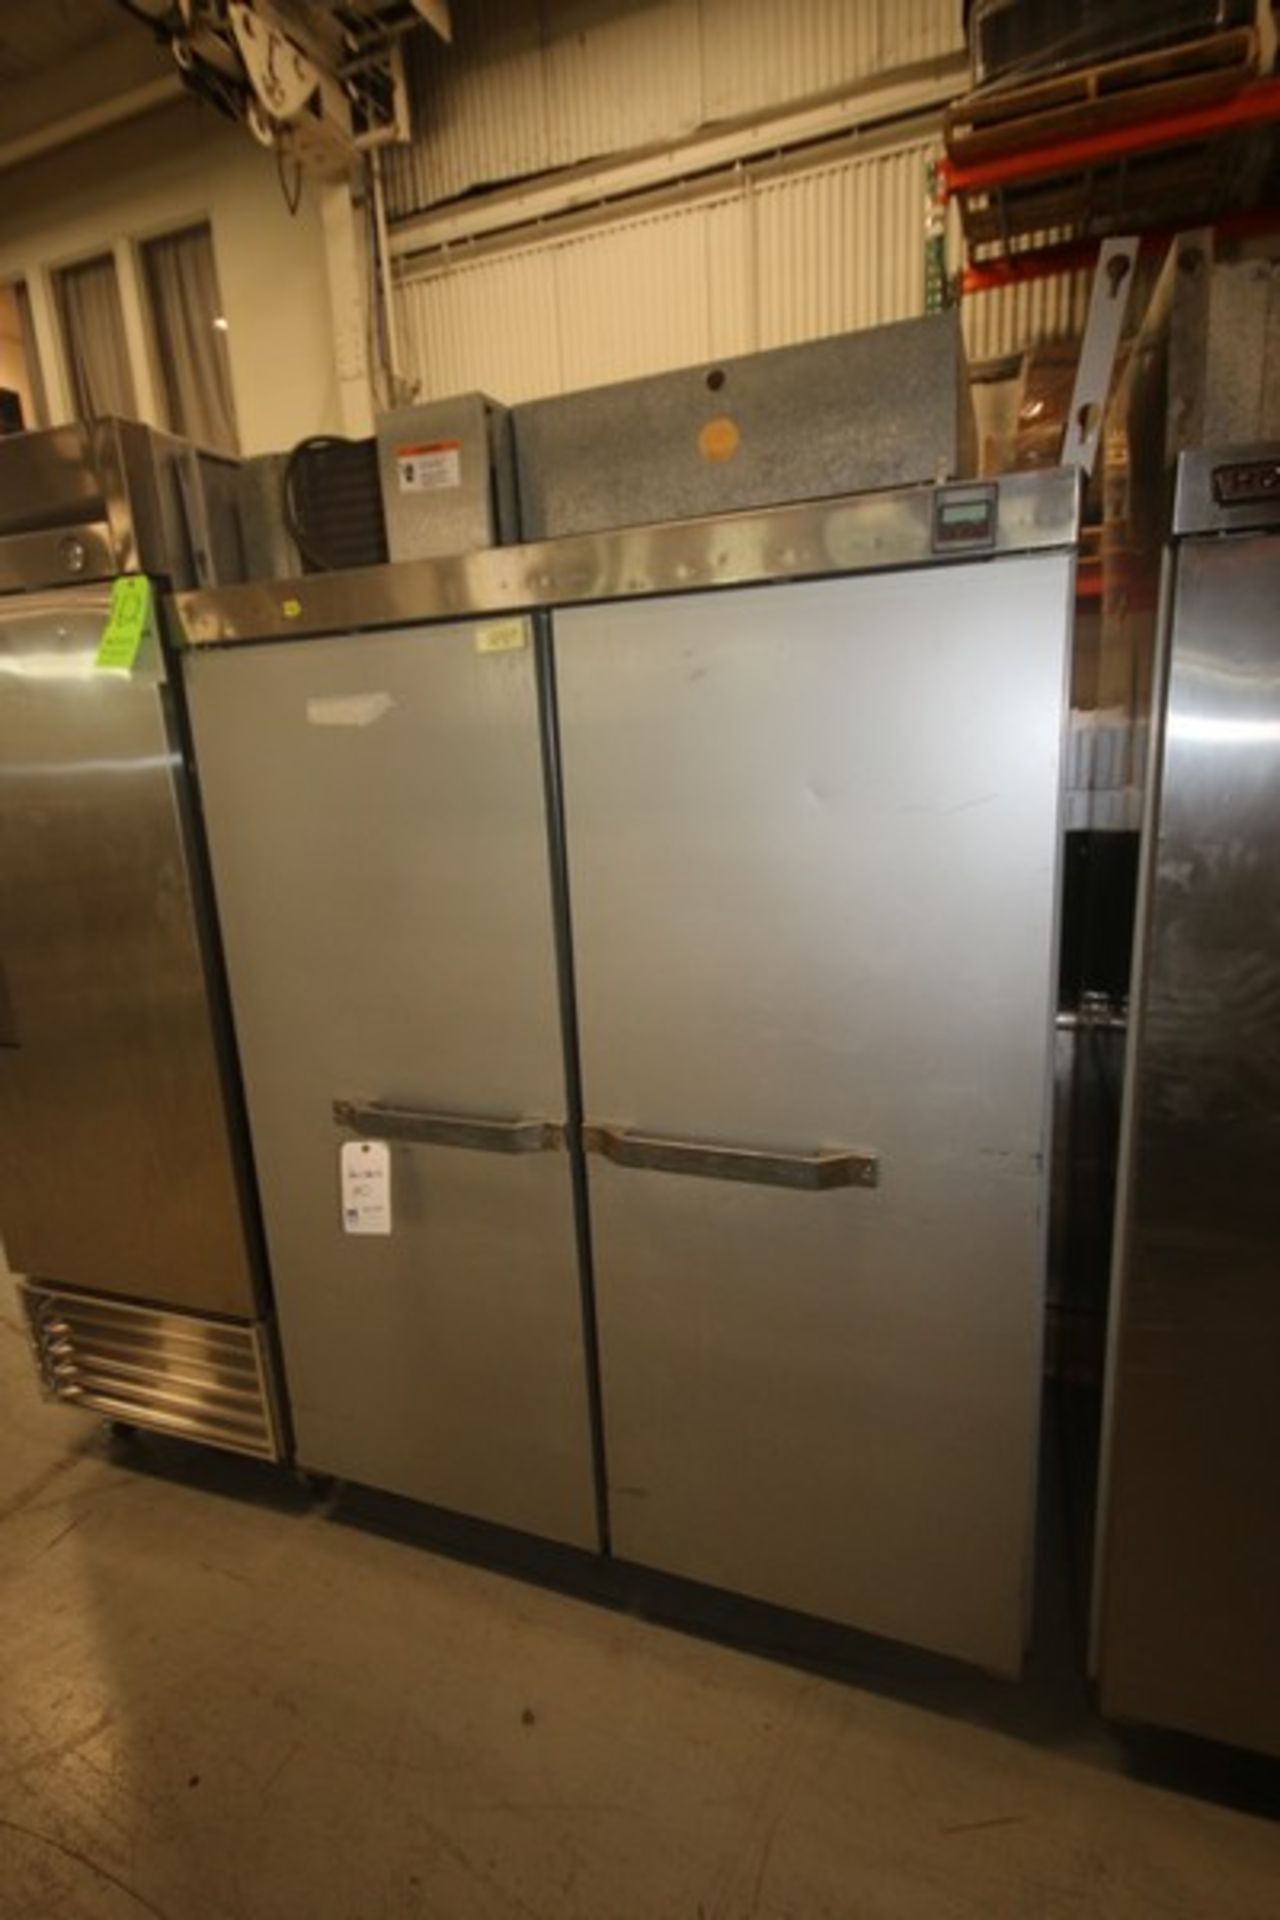 Hobart Double Door Freezer,with Internal Pan Rack Inserts, Overall Dims.: Aprox. 54" L x 33" W x 82"